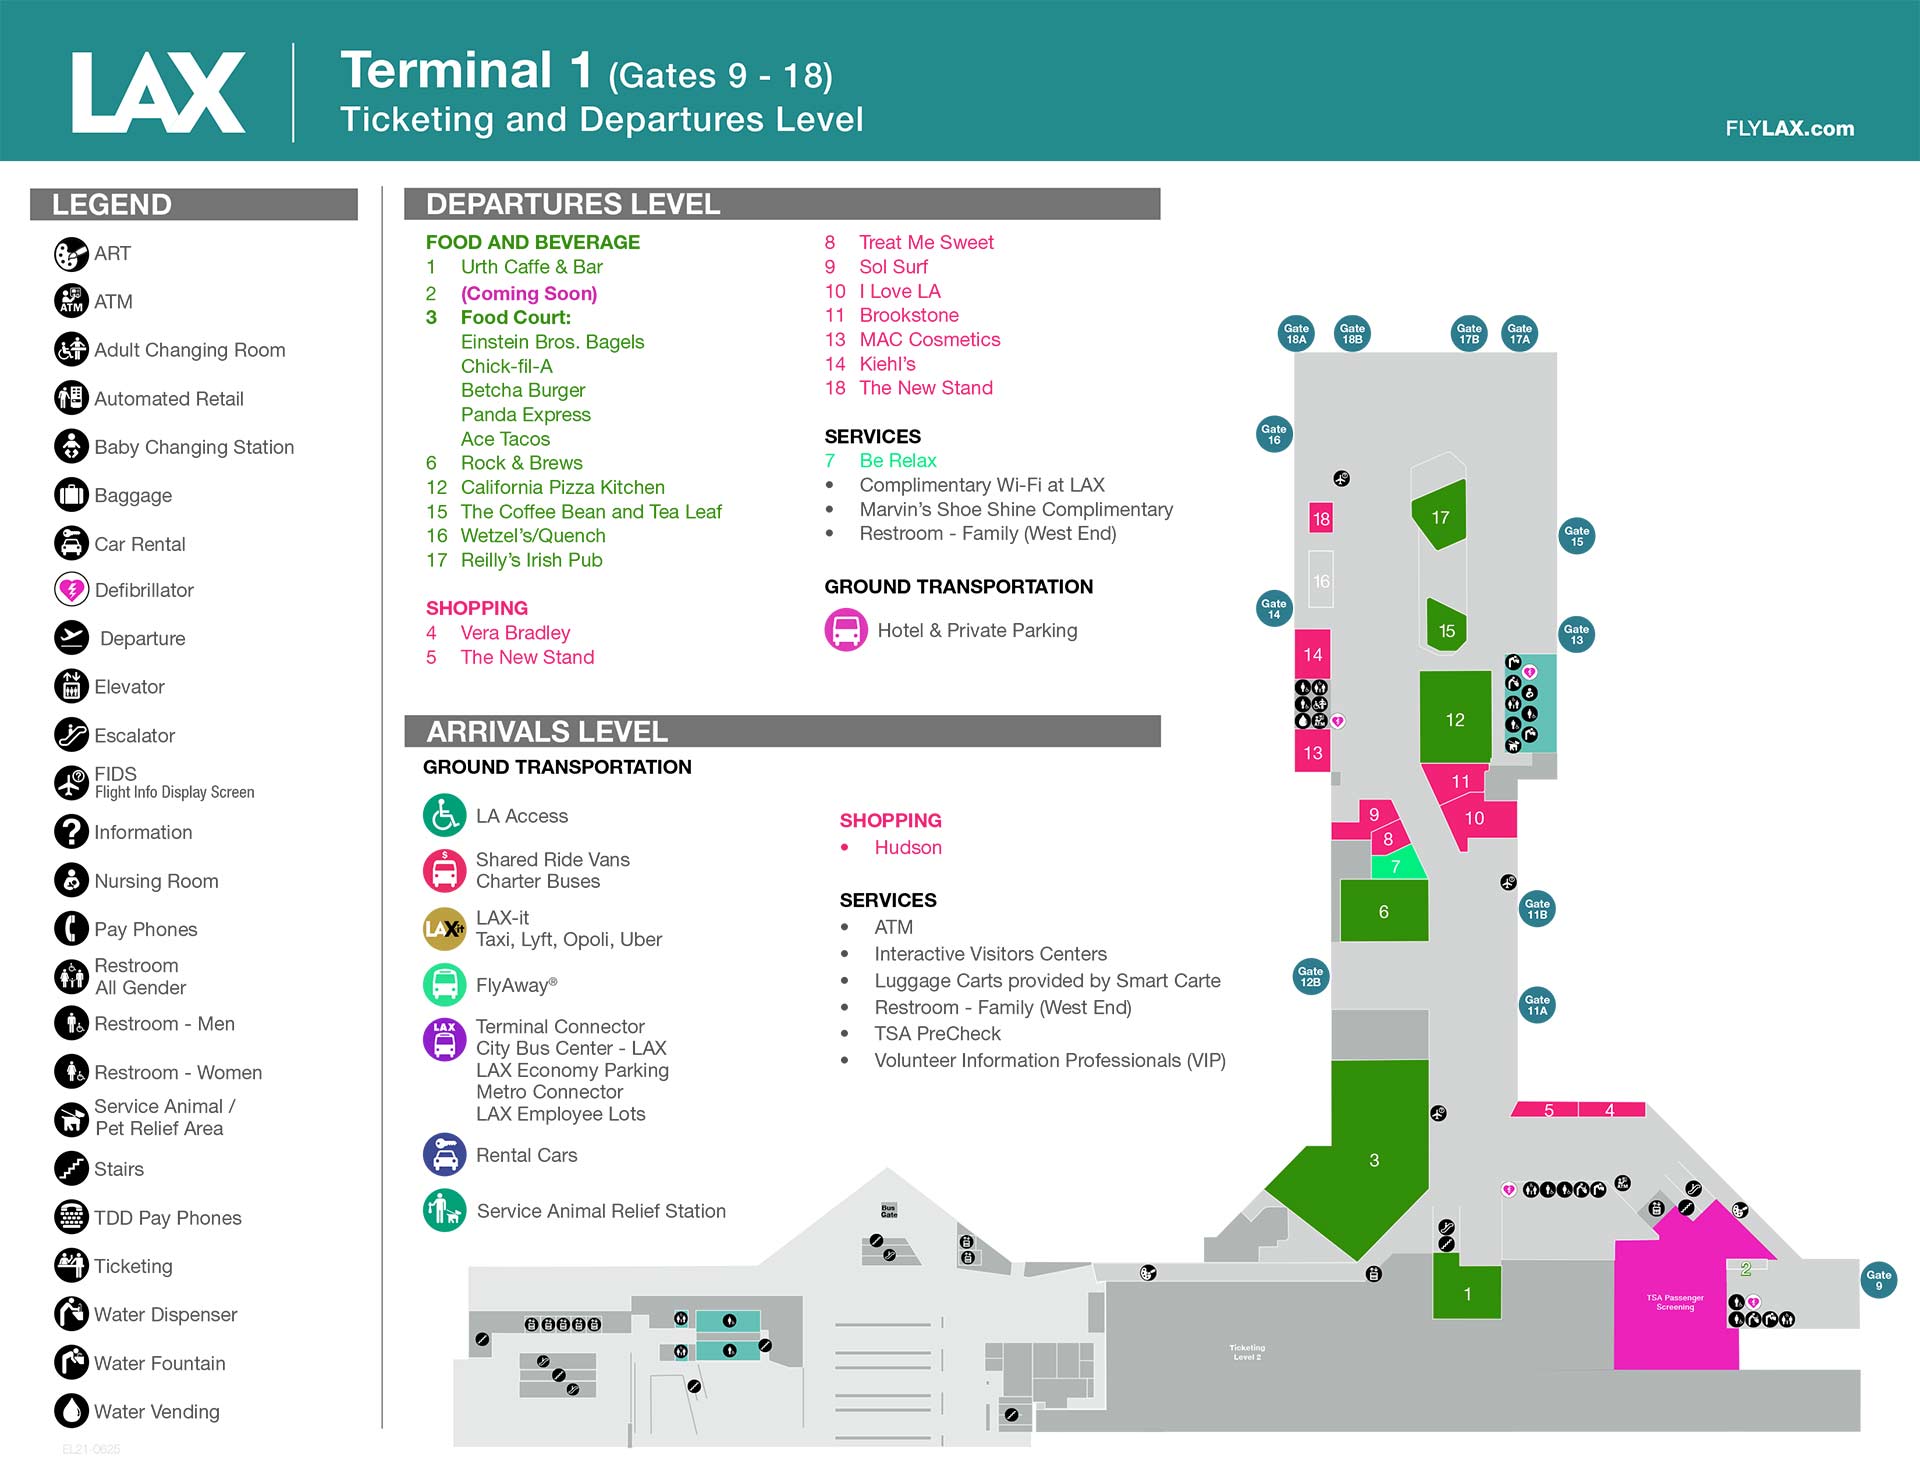 Terminal 1 Los Angeles Airport map